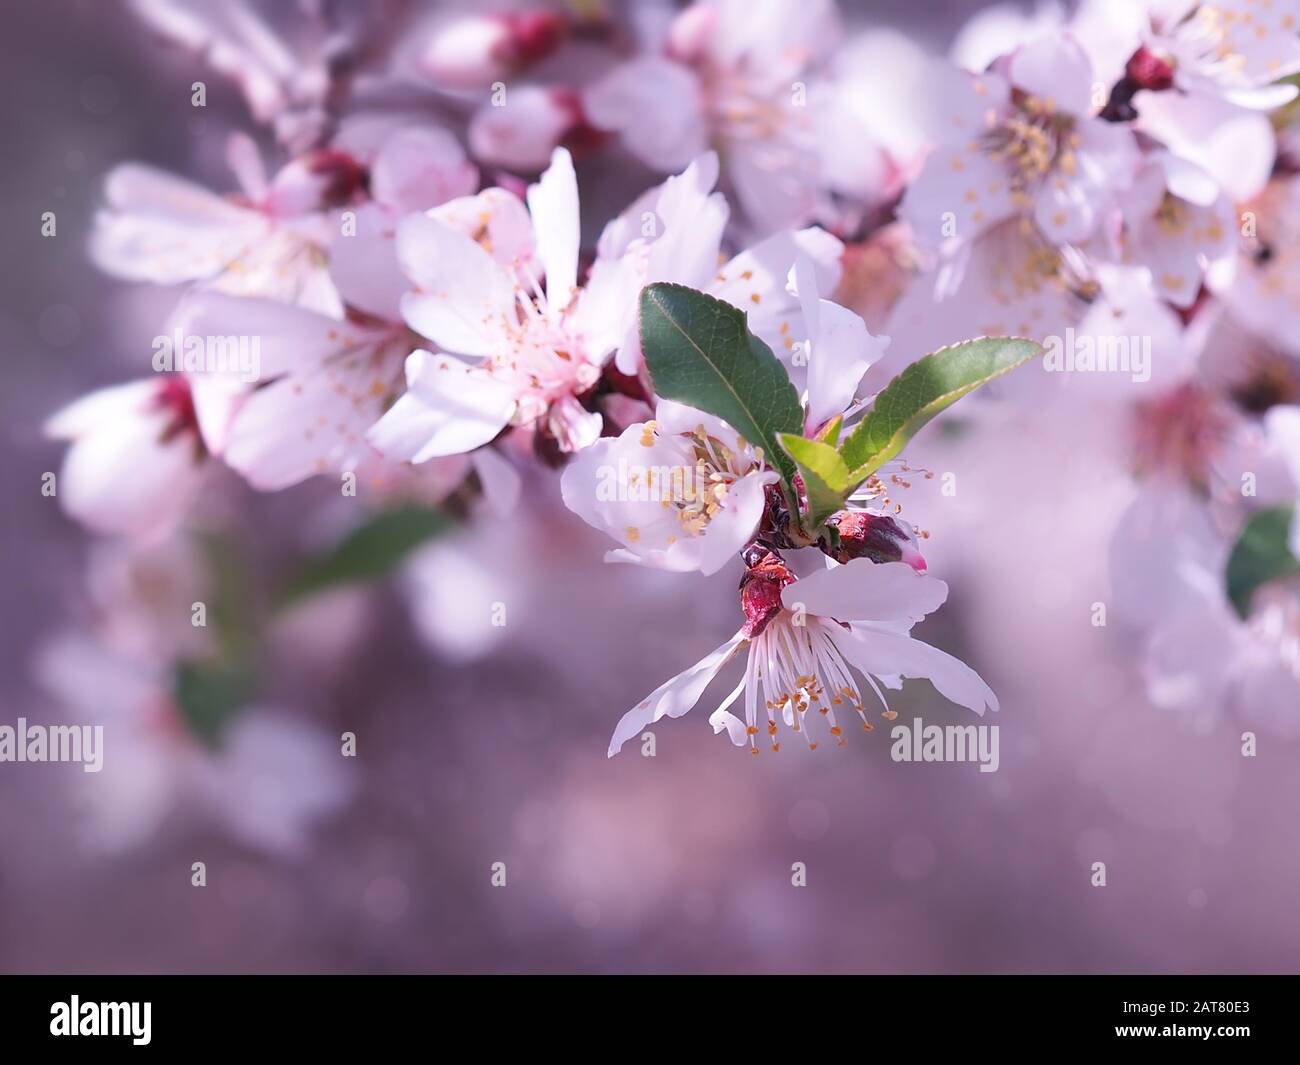 A beautiful branch of flowering almond in pink colors and with a blurred background. Stock Photo